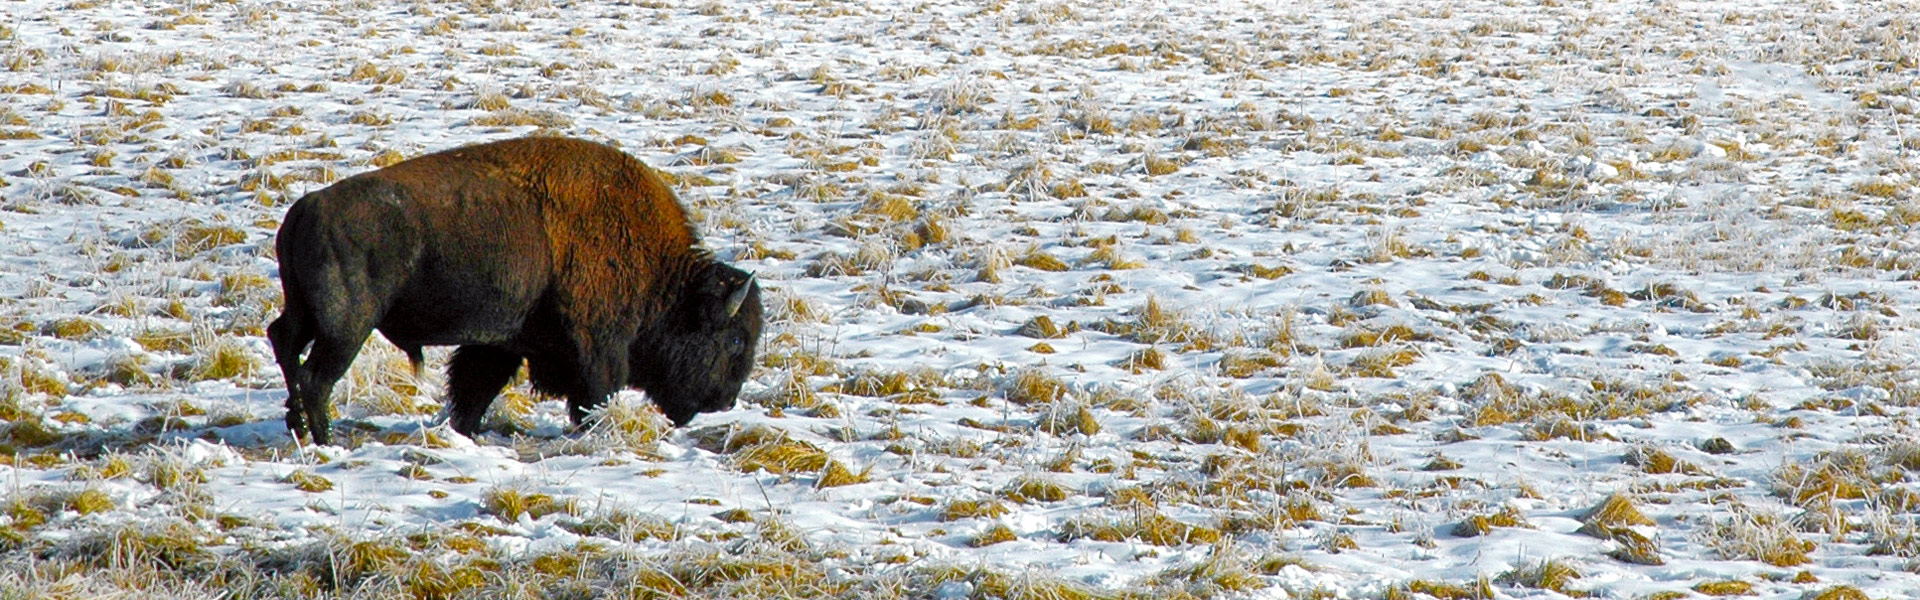 A bison in a field.